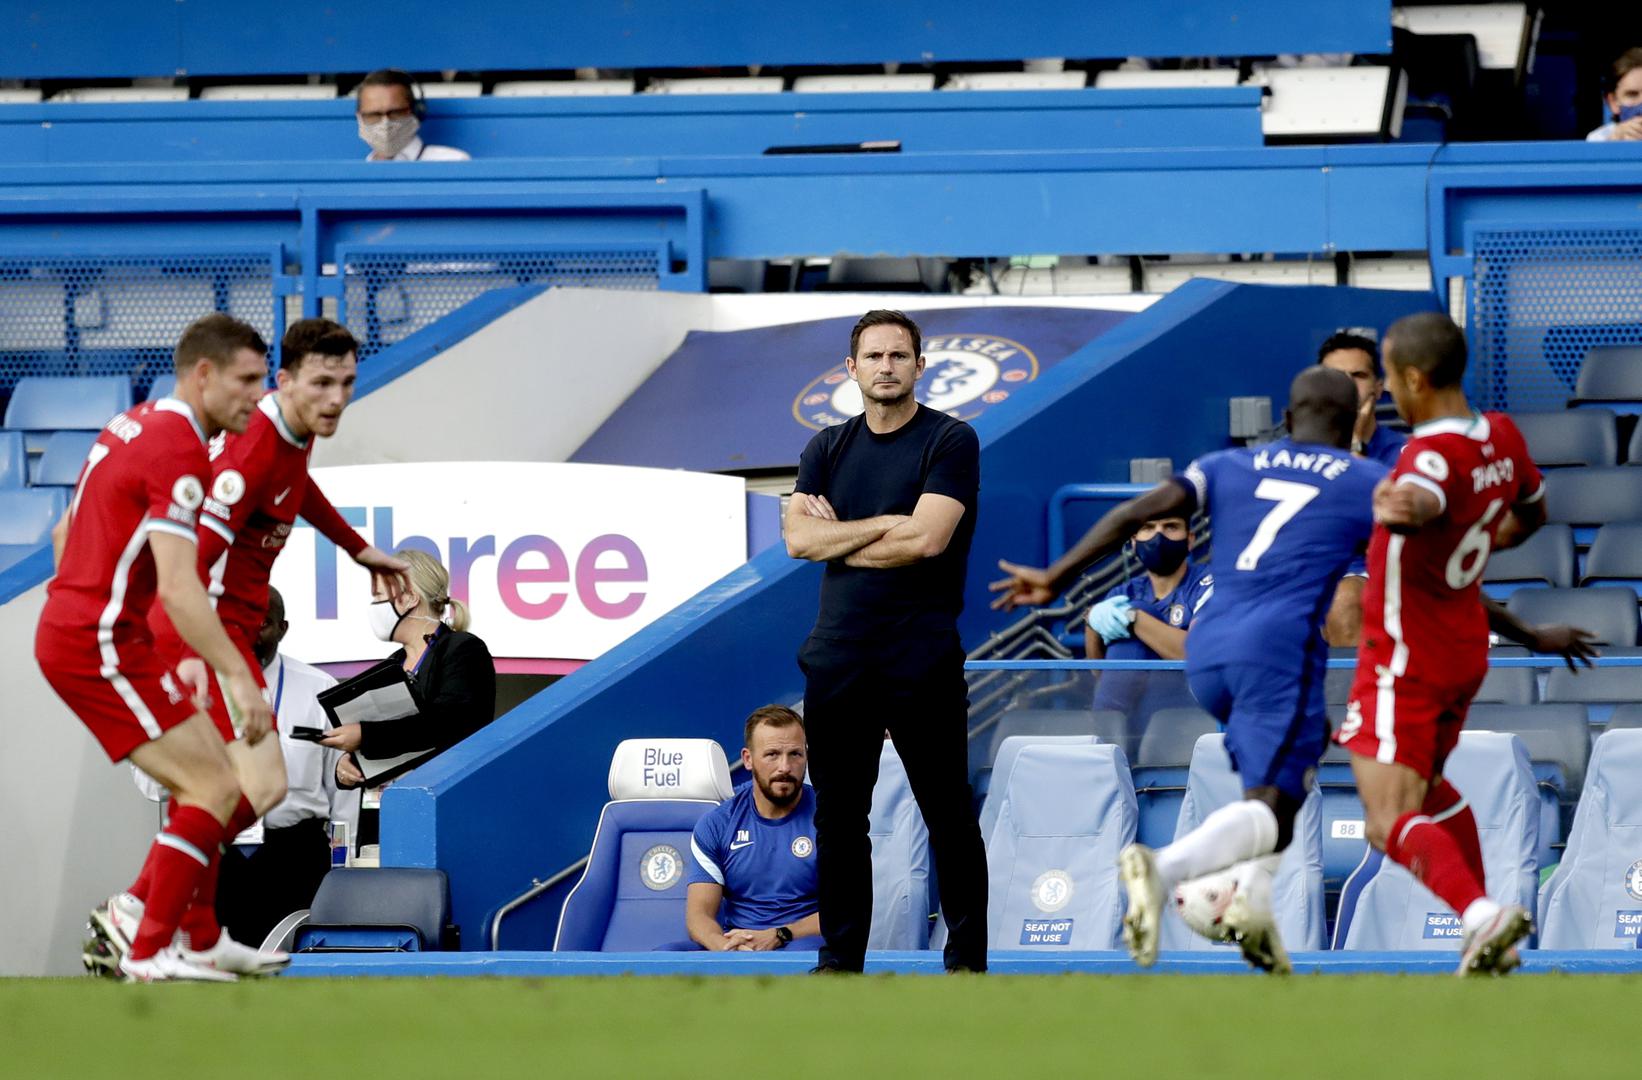 Chelsea v Liverpool - Premier League - Stamford Bridge Chelsea manager Frank Lampard (centre) watches from the touchline during the Premier League match at Stamford Bridge, London. Matt Dunham  Photo: PA Images/PIXSELL